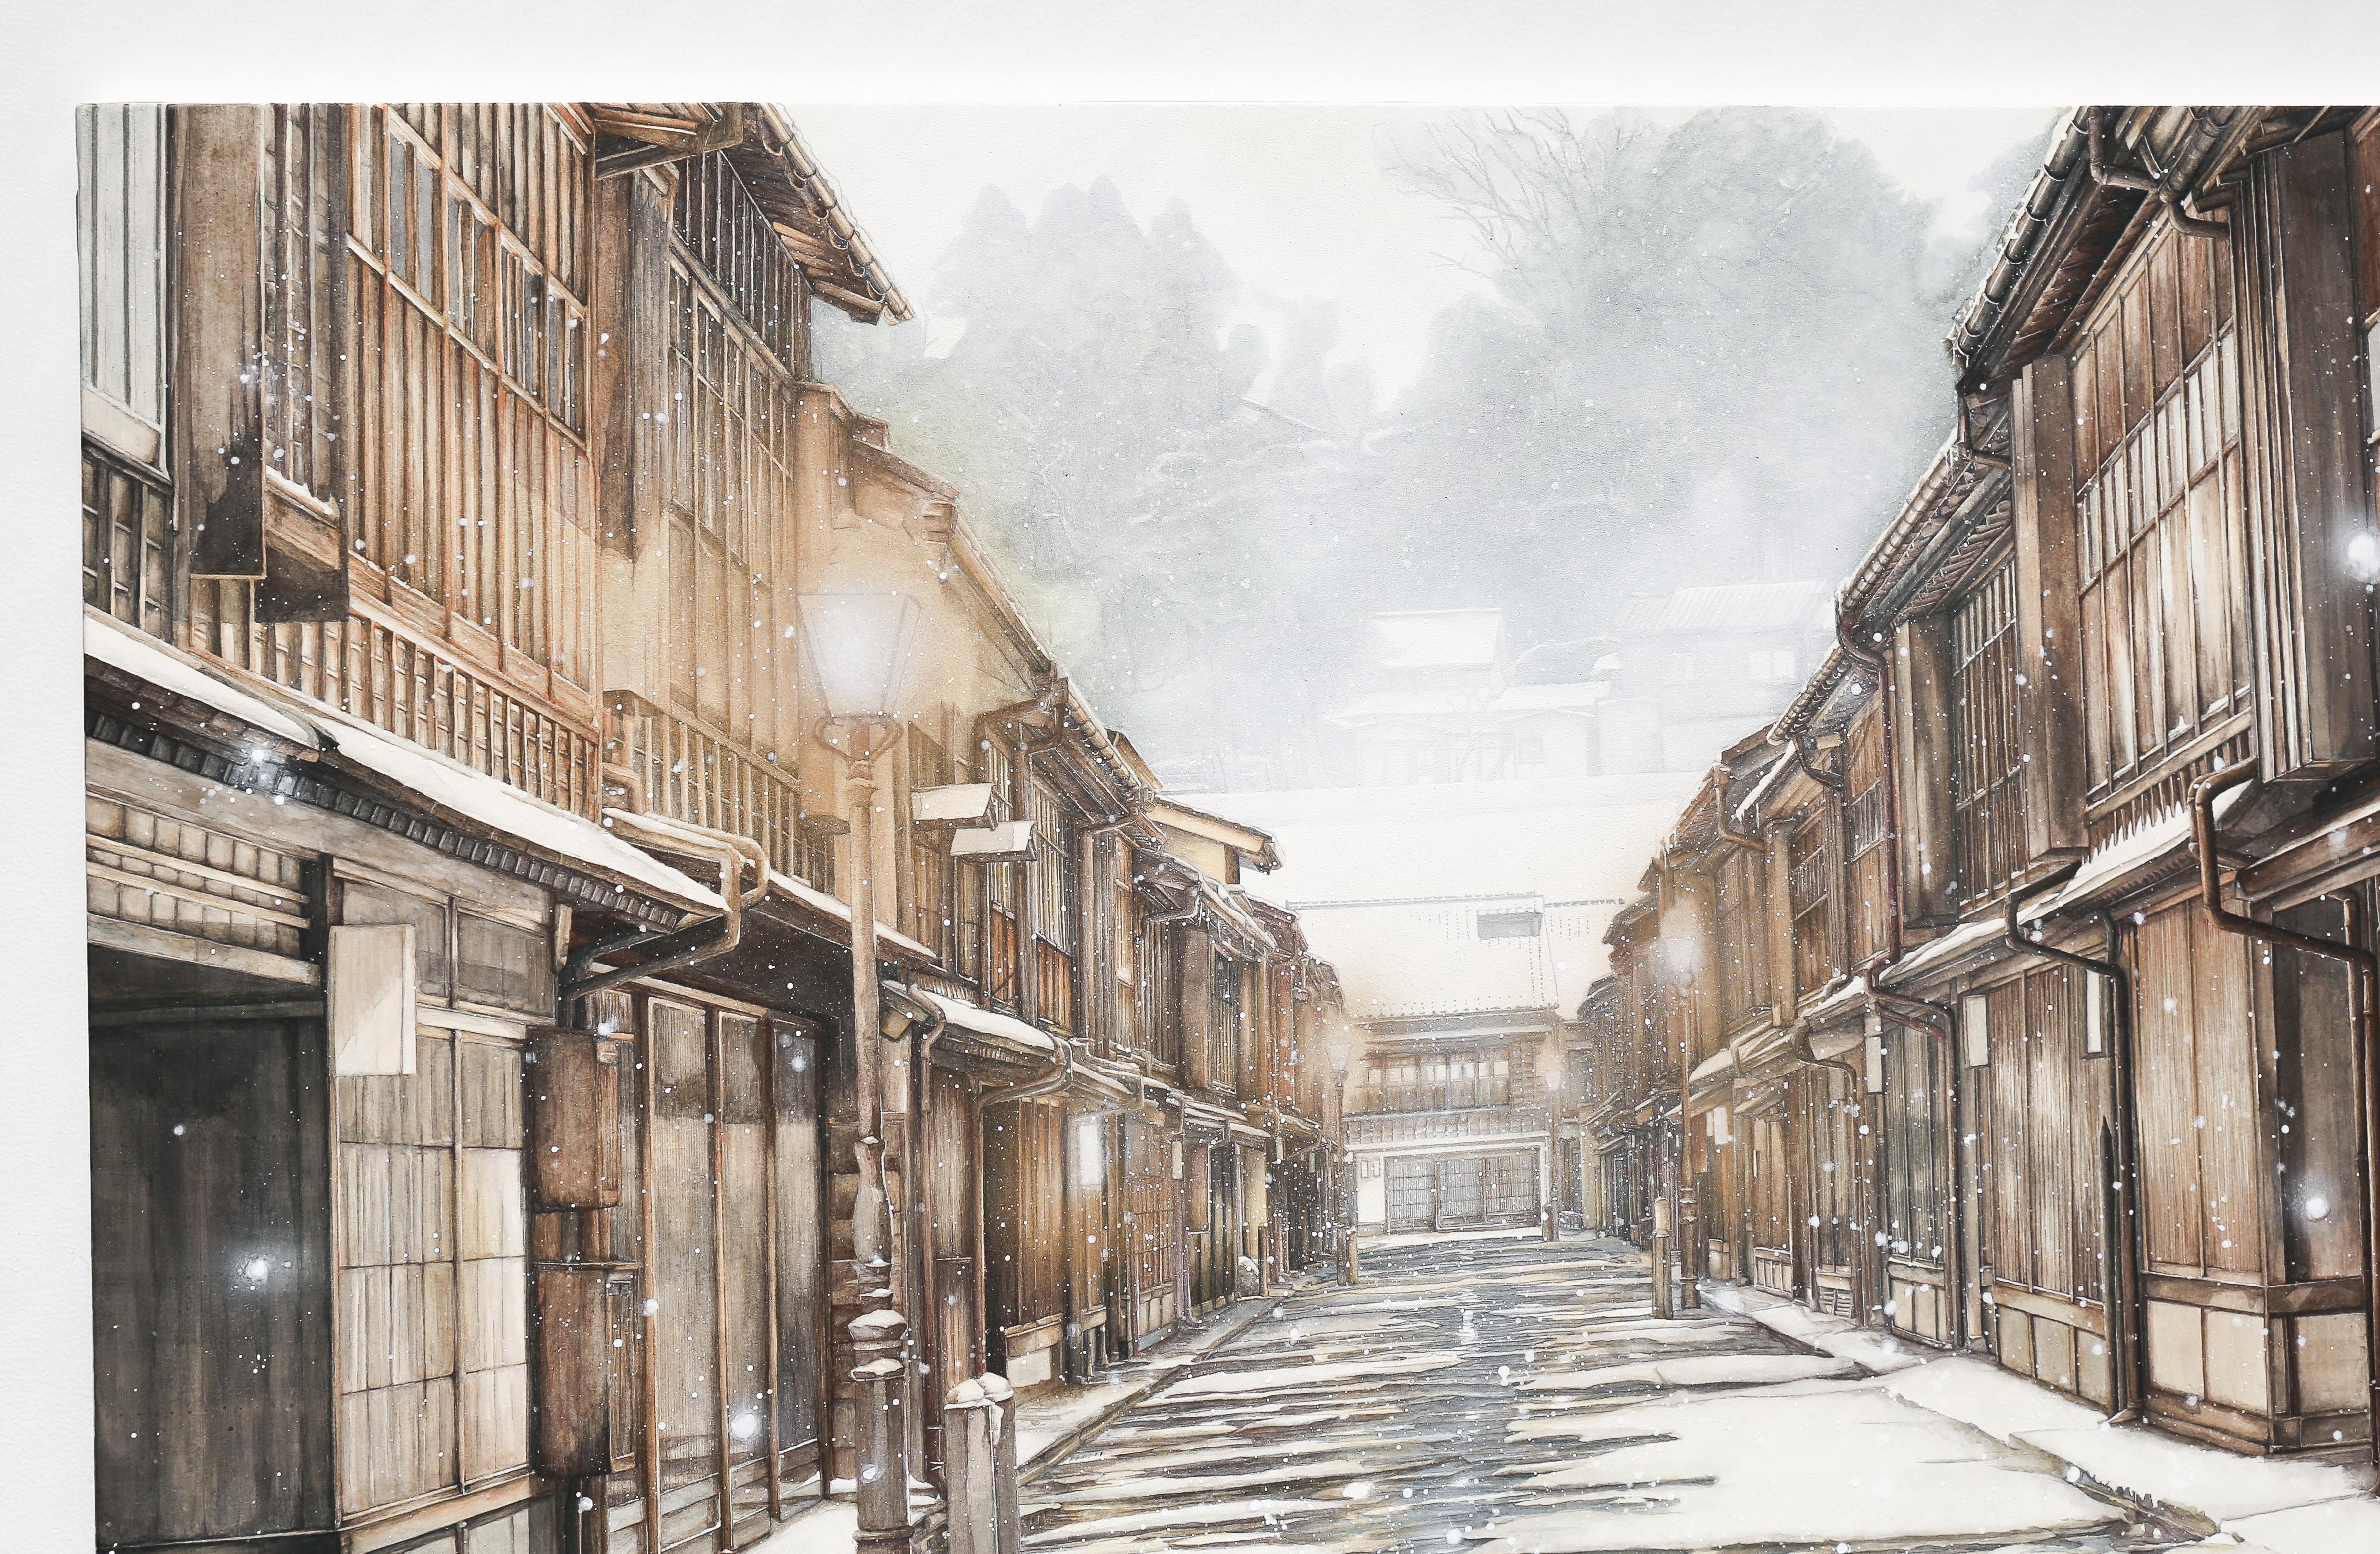 Kanazawa - Japanese Cityscape Painting in 24k Gold and Minerals, Realism, Winter For Sale 5